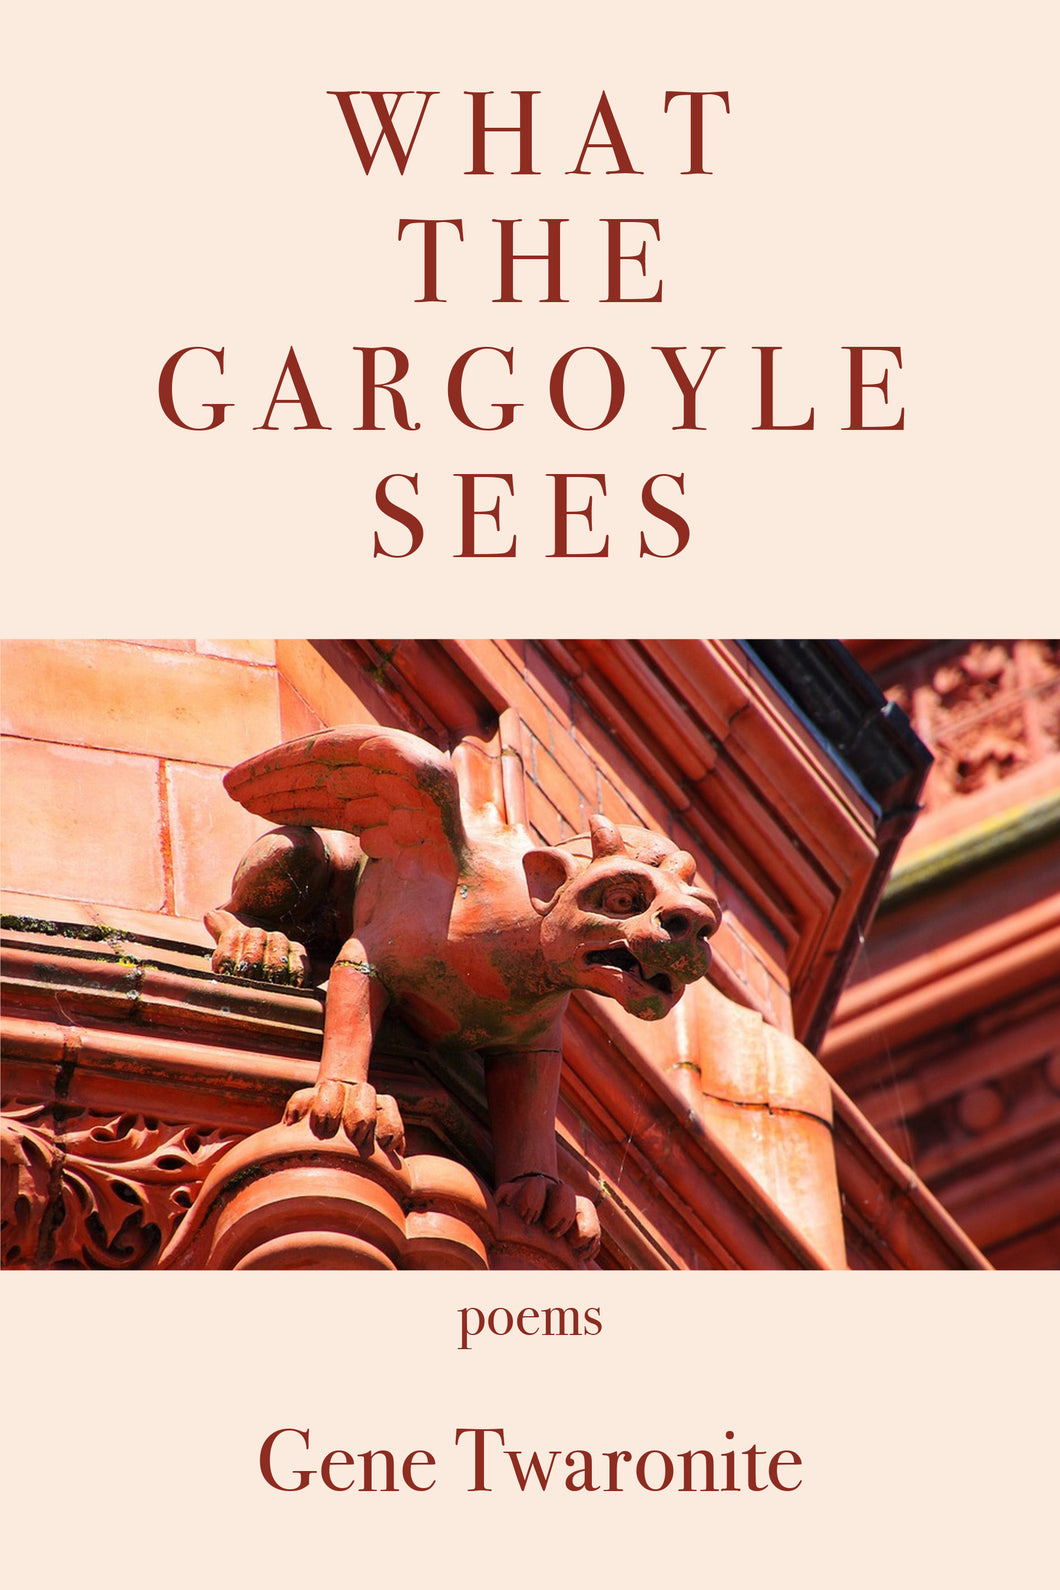 What the Gargoyle Sees